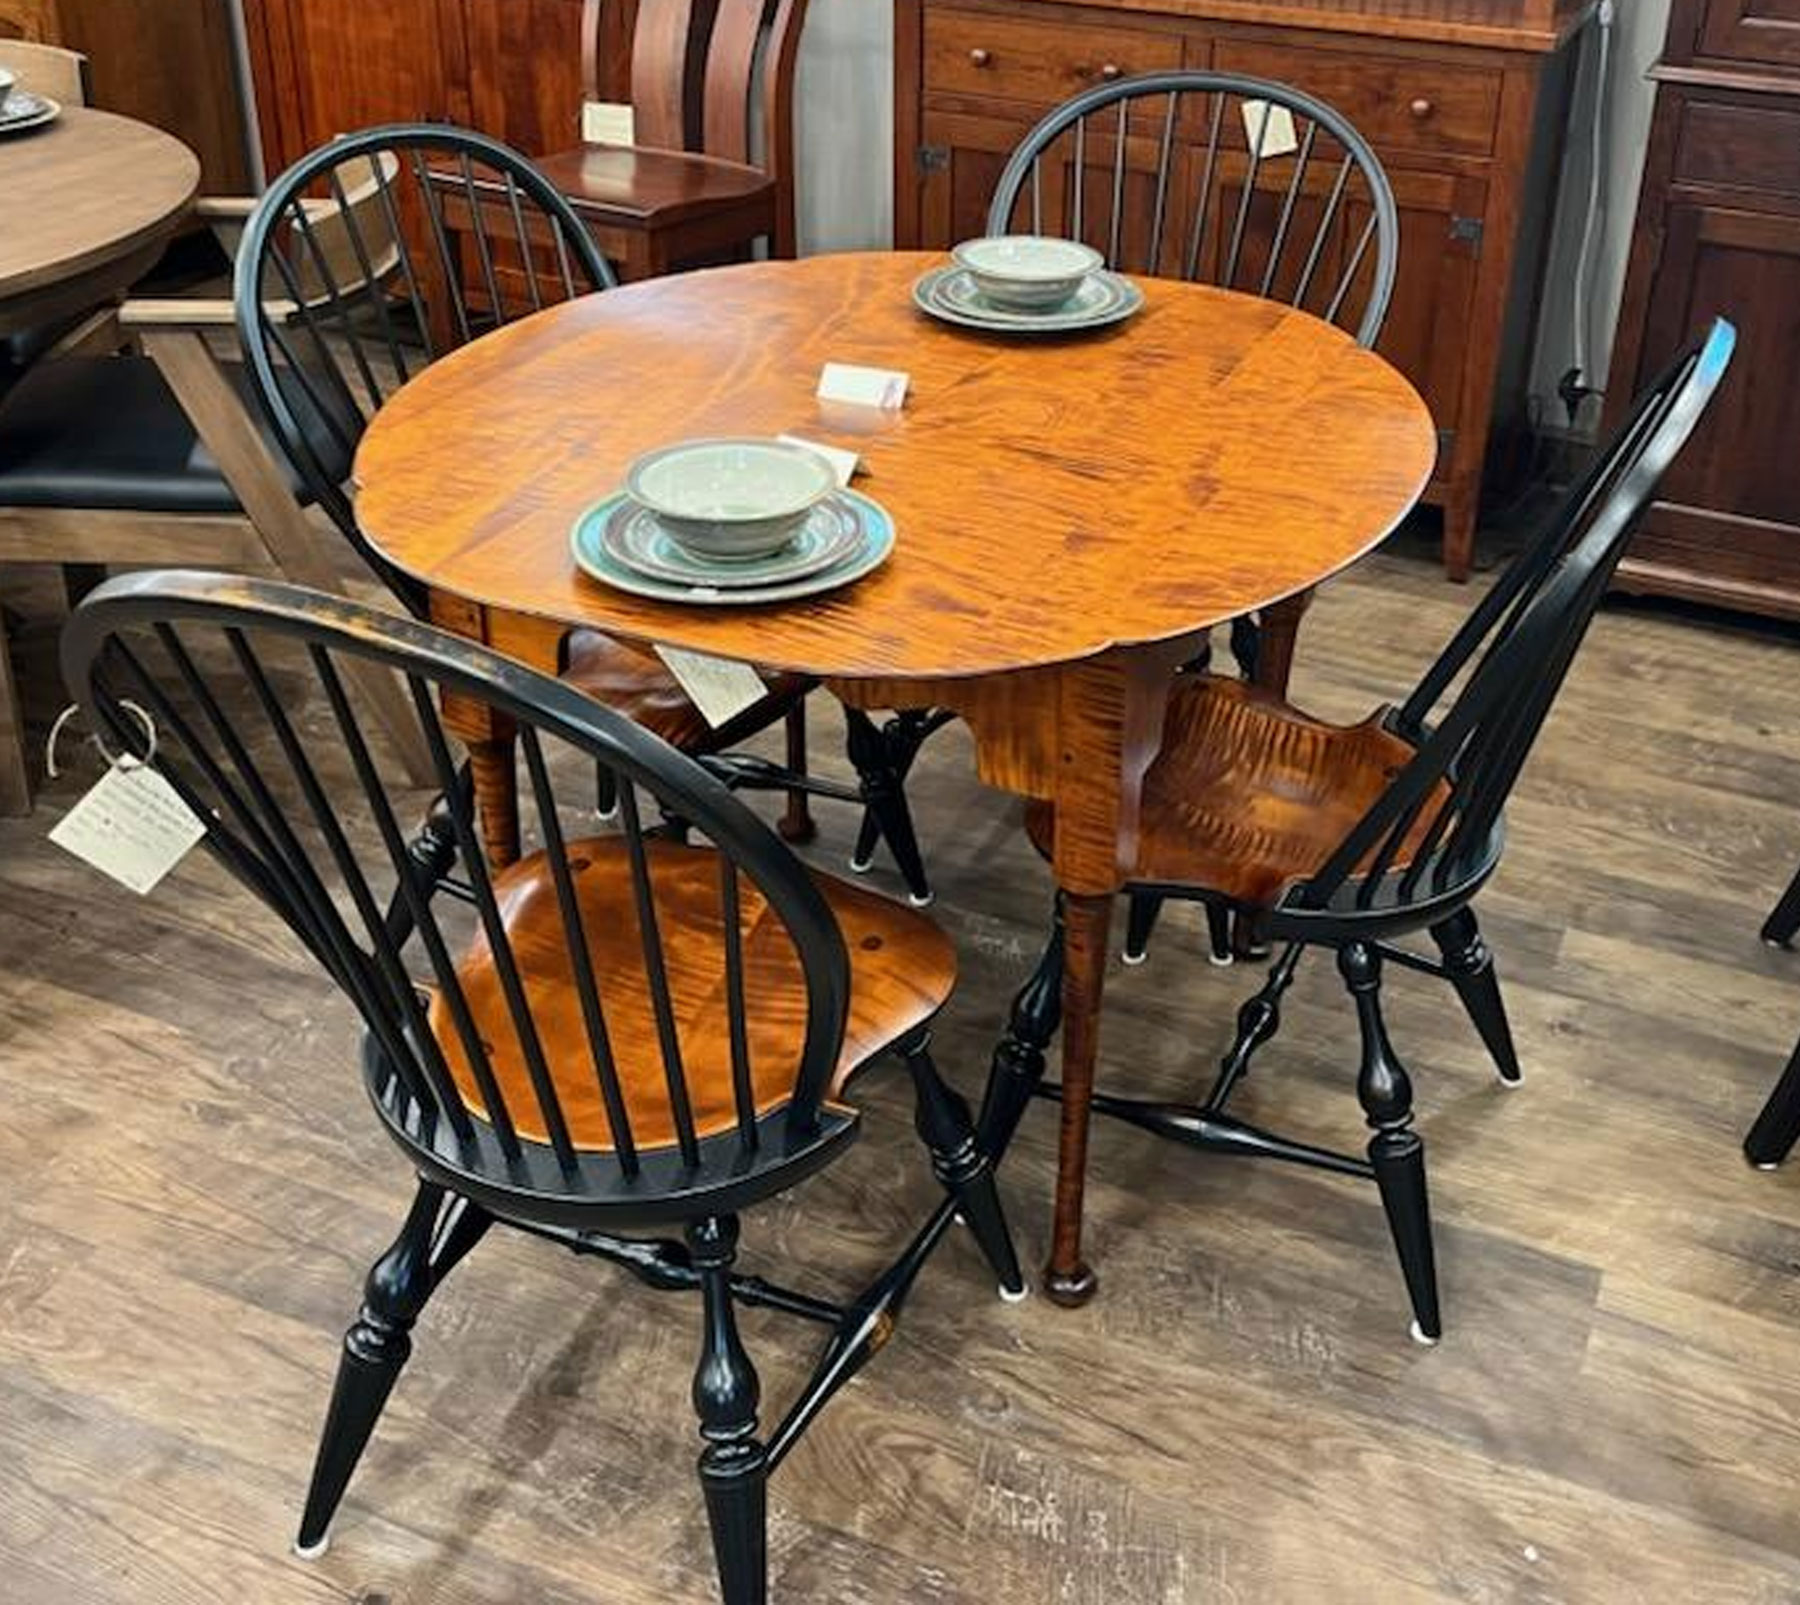 Treharn Springfield Dining Table with (4) Windsor Side Chairs